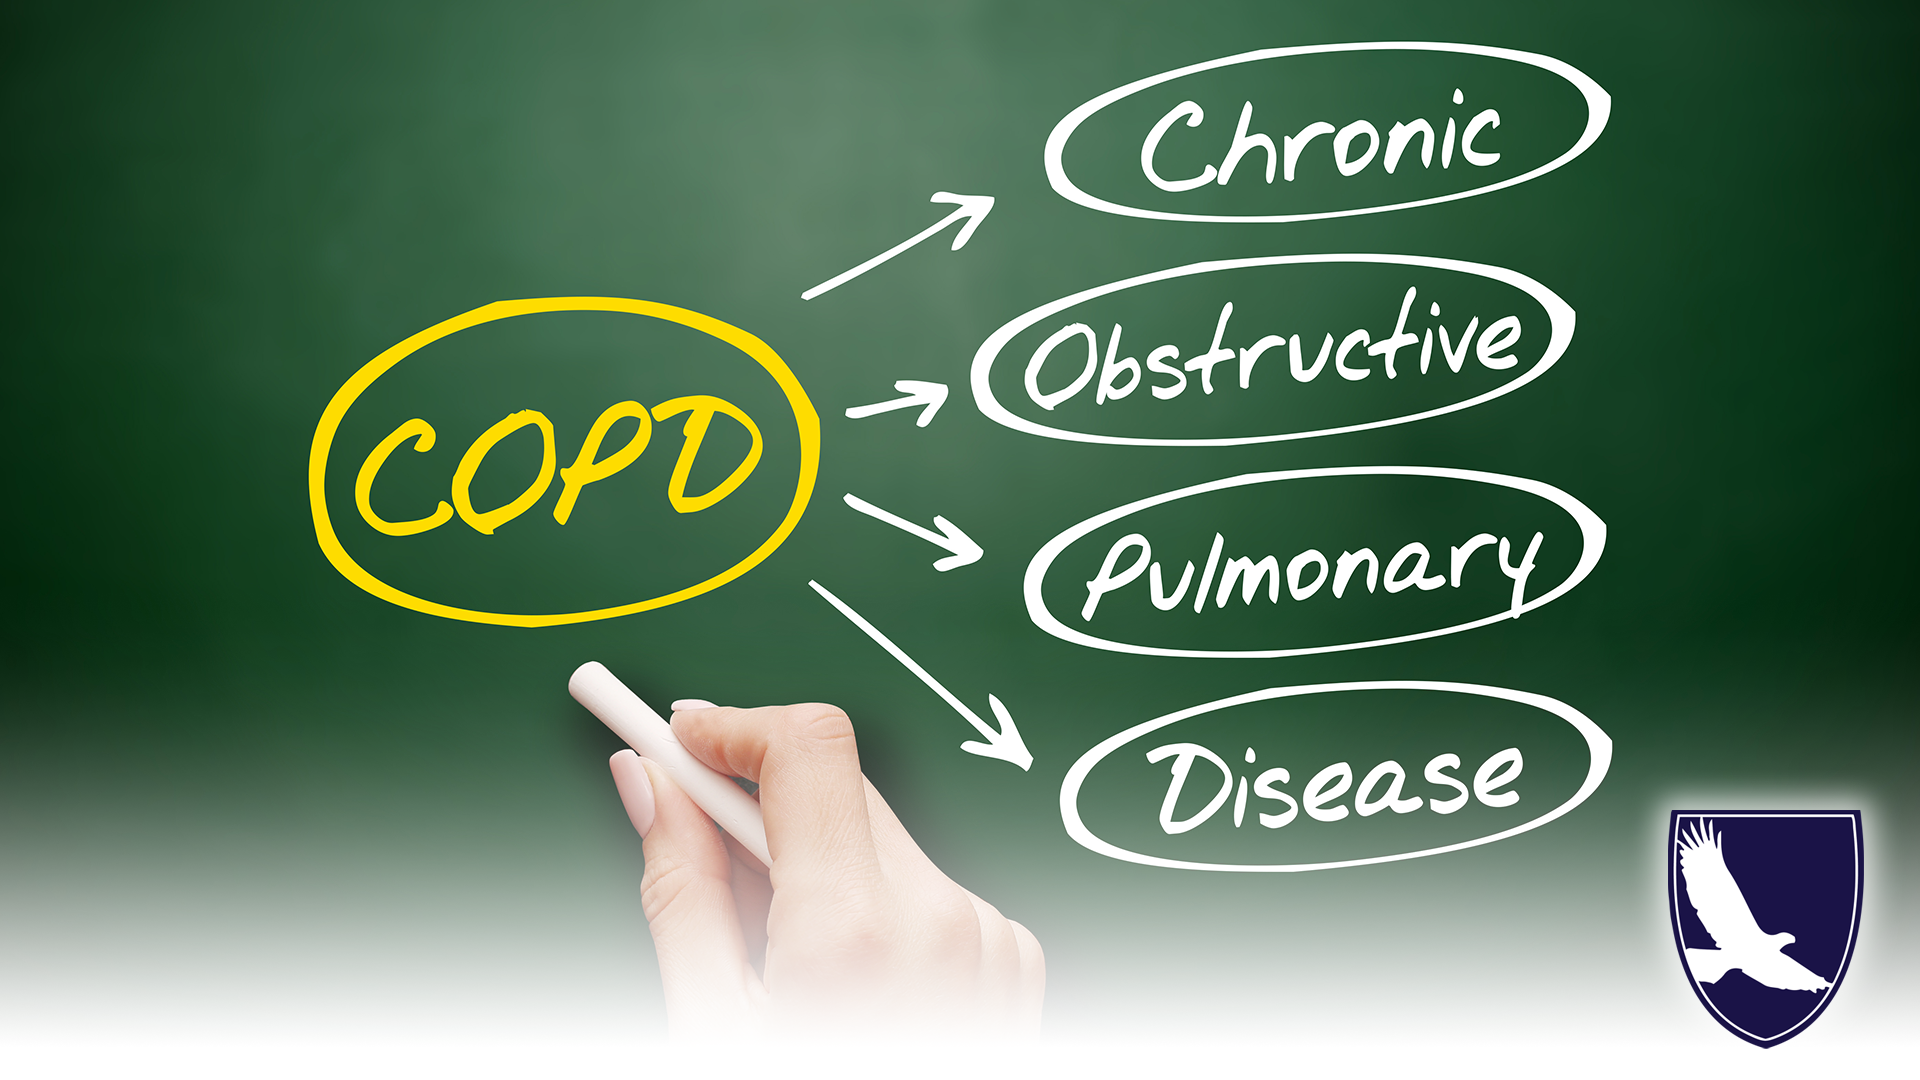 DOES COPD QUALIFY FOR SOCIAL SECURITY SSDI SSI BENEFITS